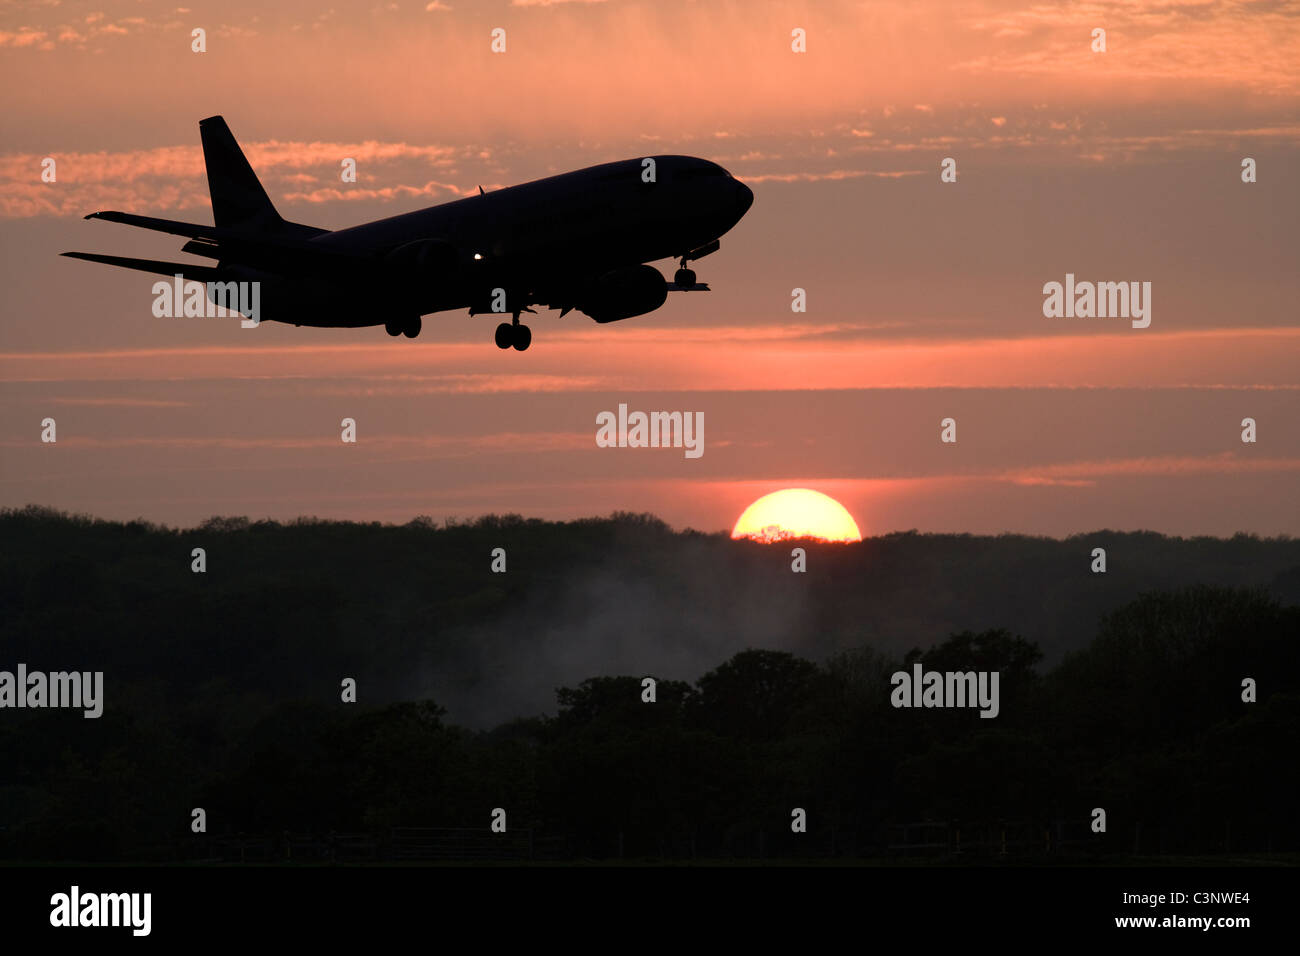 Aeroplane about to land, against setting sun. Stock Photo